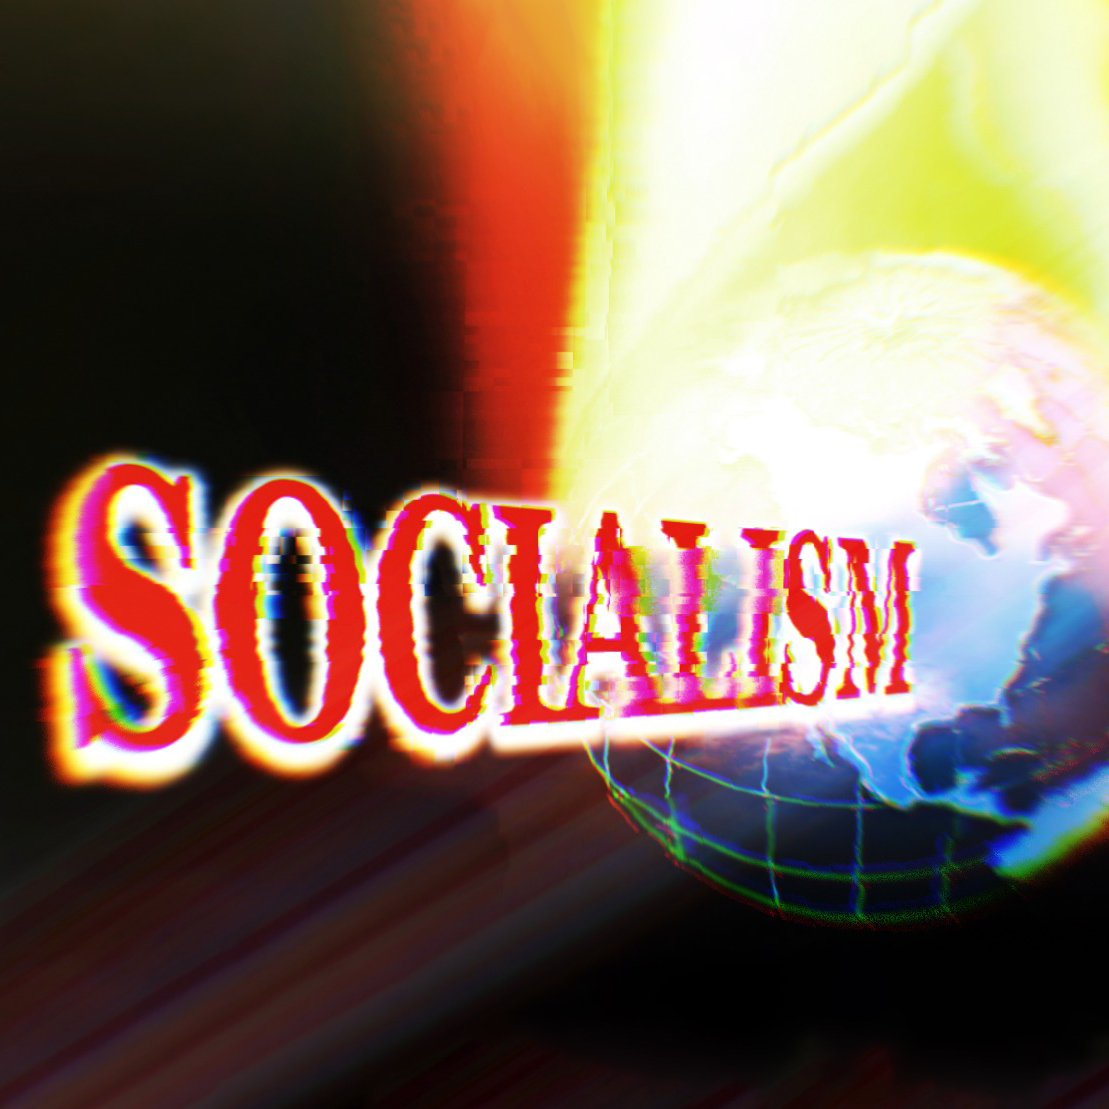 Text that says Socialism over a globe.